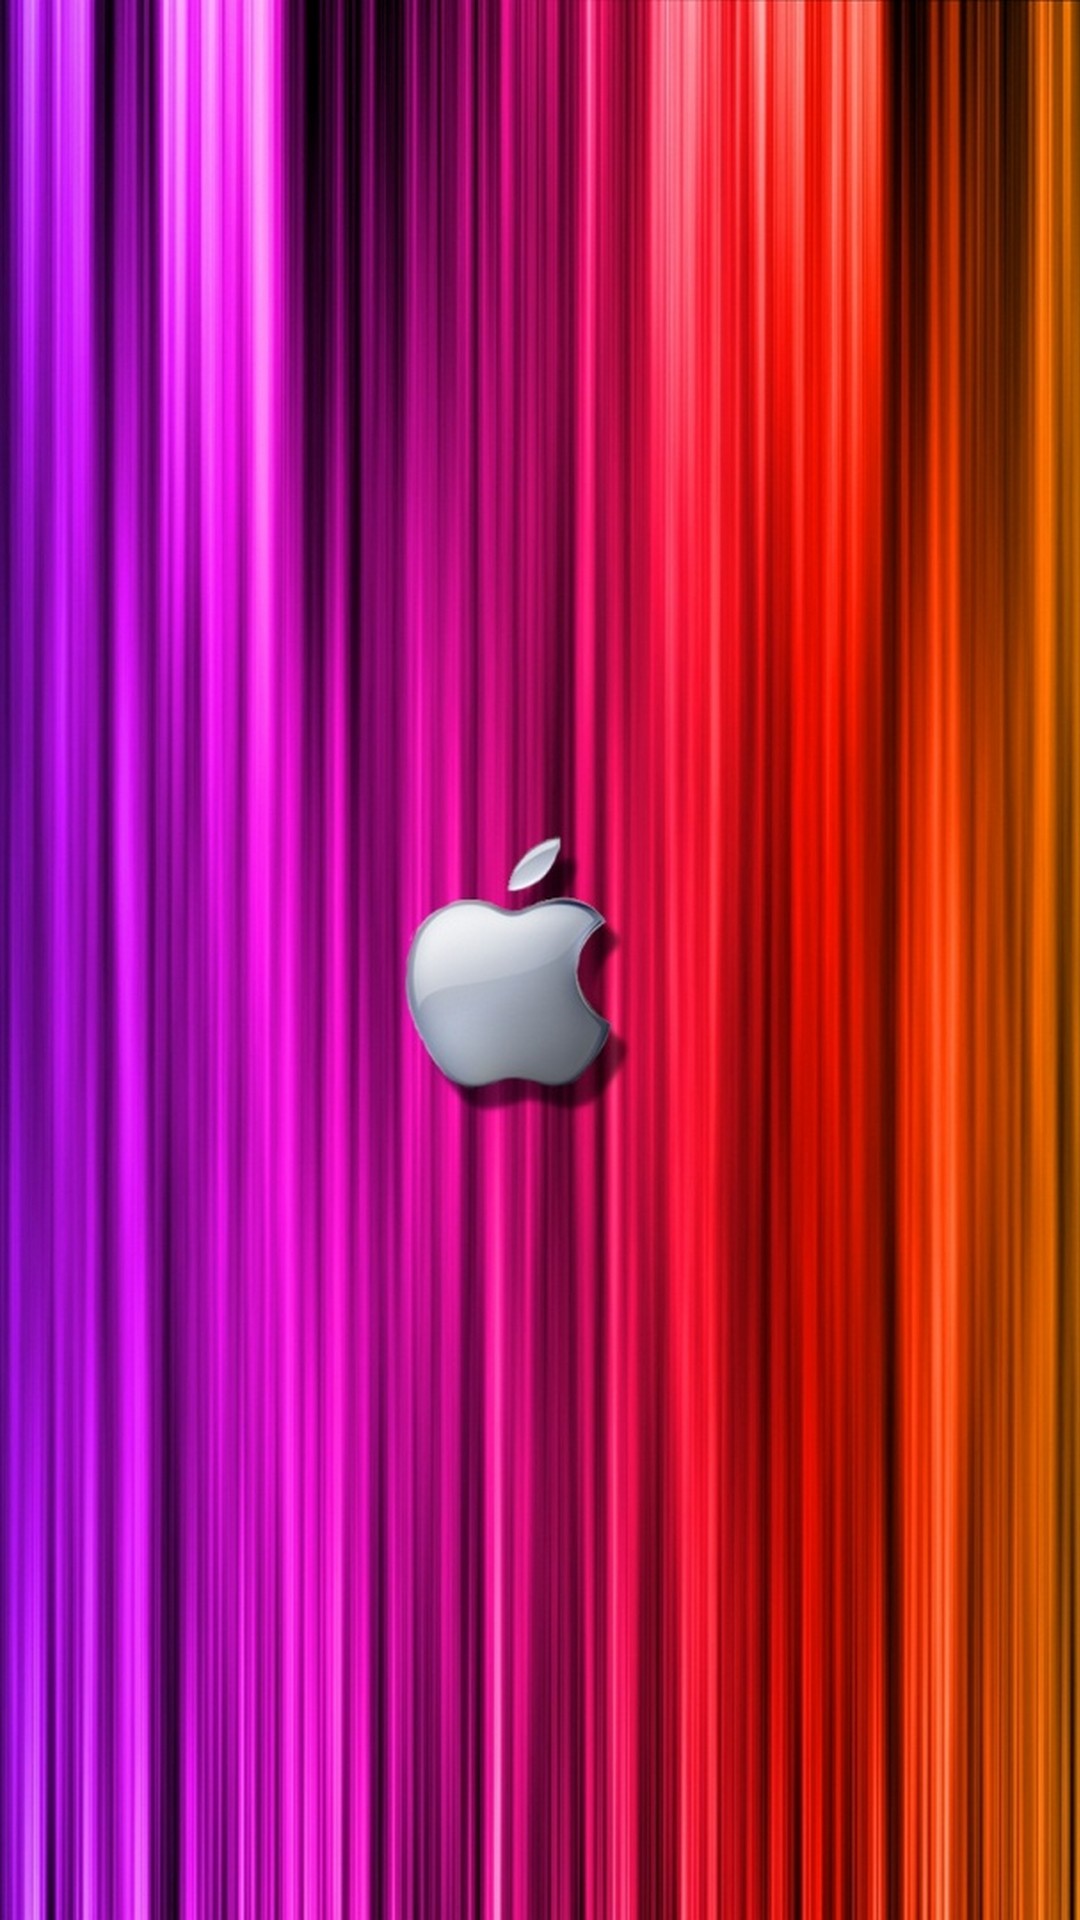 iPhone Wallpaper Rainbow with image resolution 1080x1920 pixel. You can make this wallpaper for your iPhone 5, 6, 7, 8, X backgrounds, Mobile Screensaver, or iPad Lock Screen